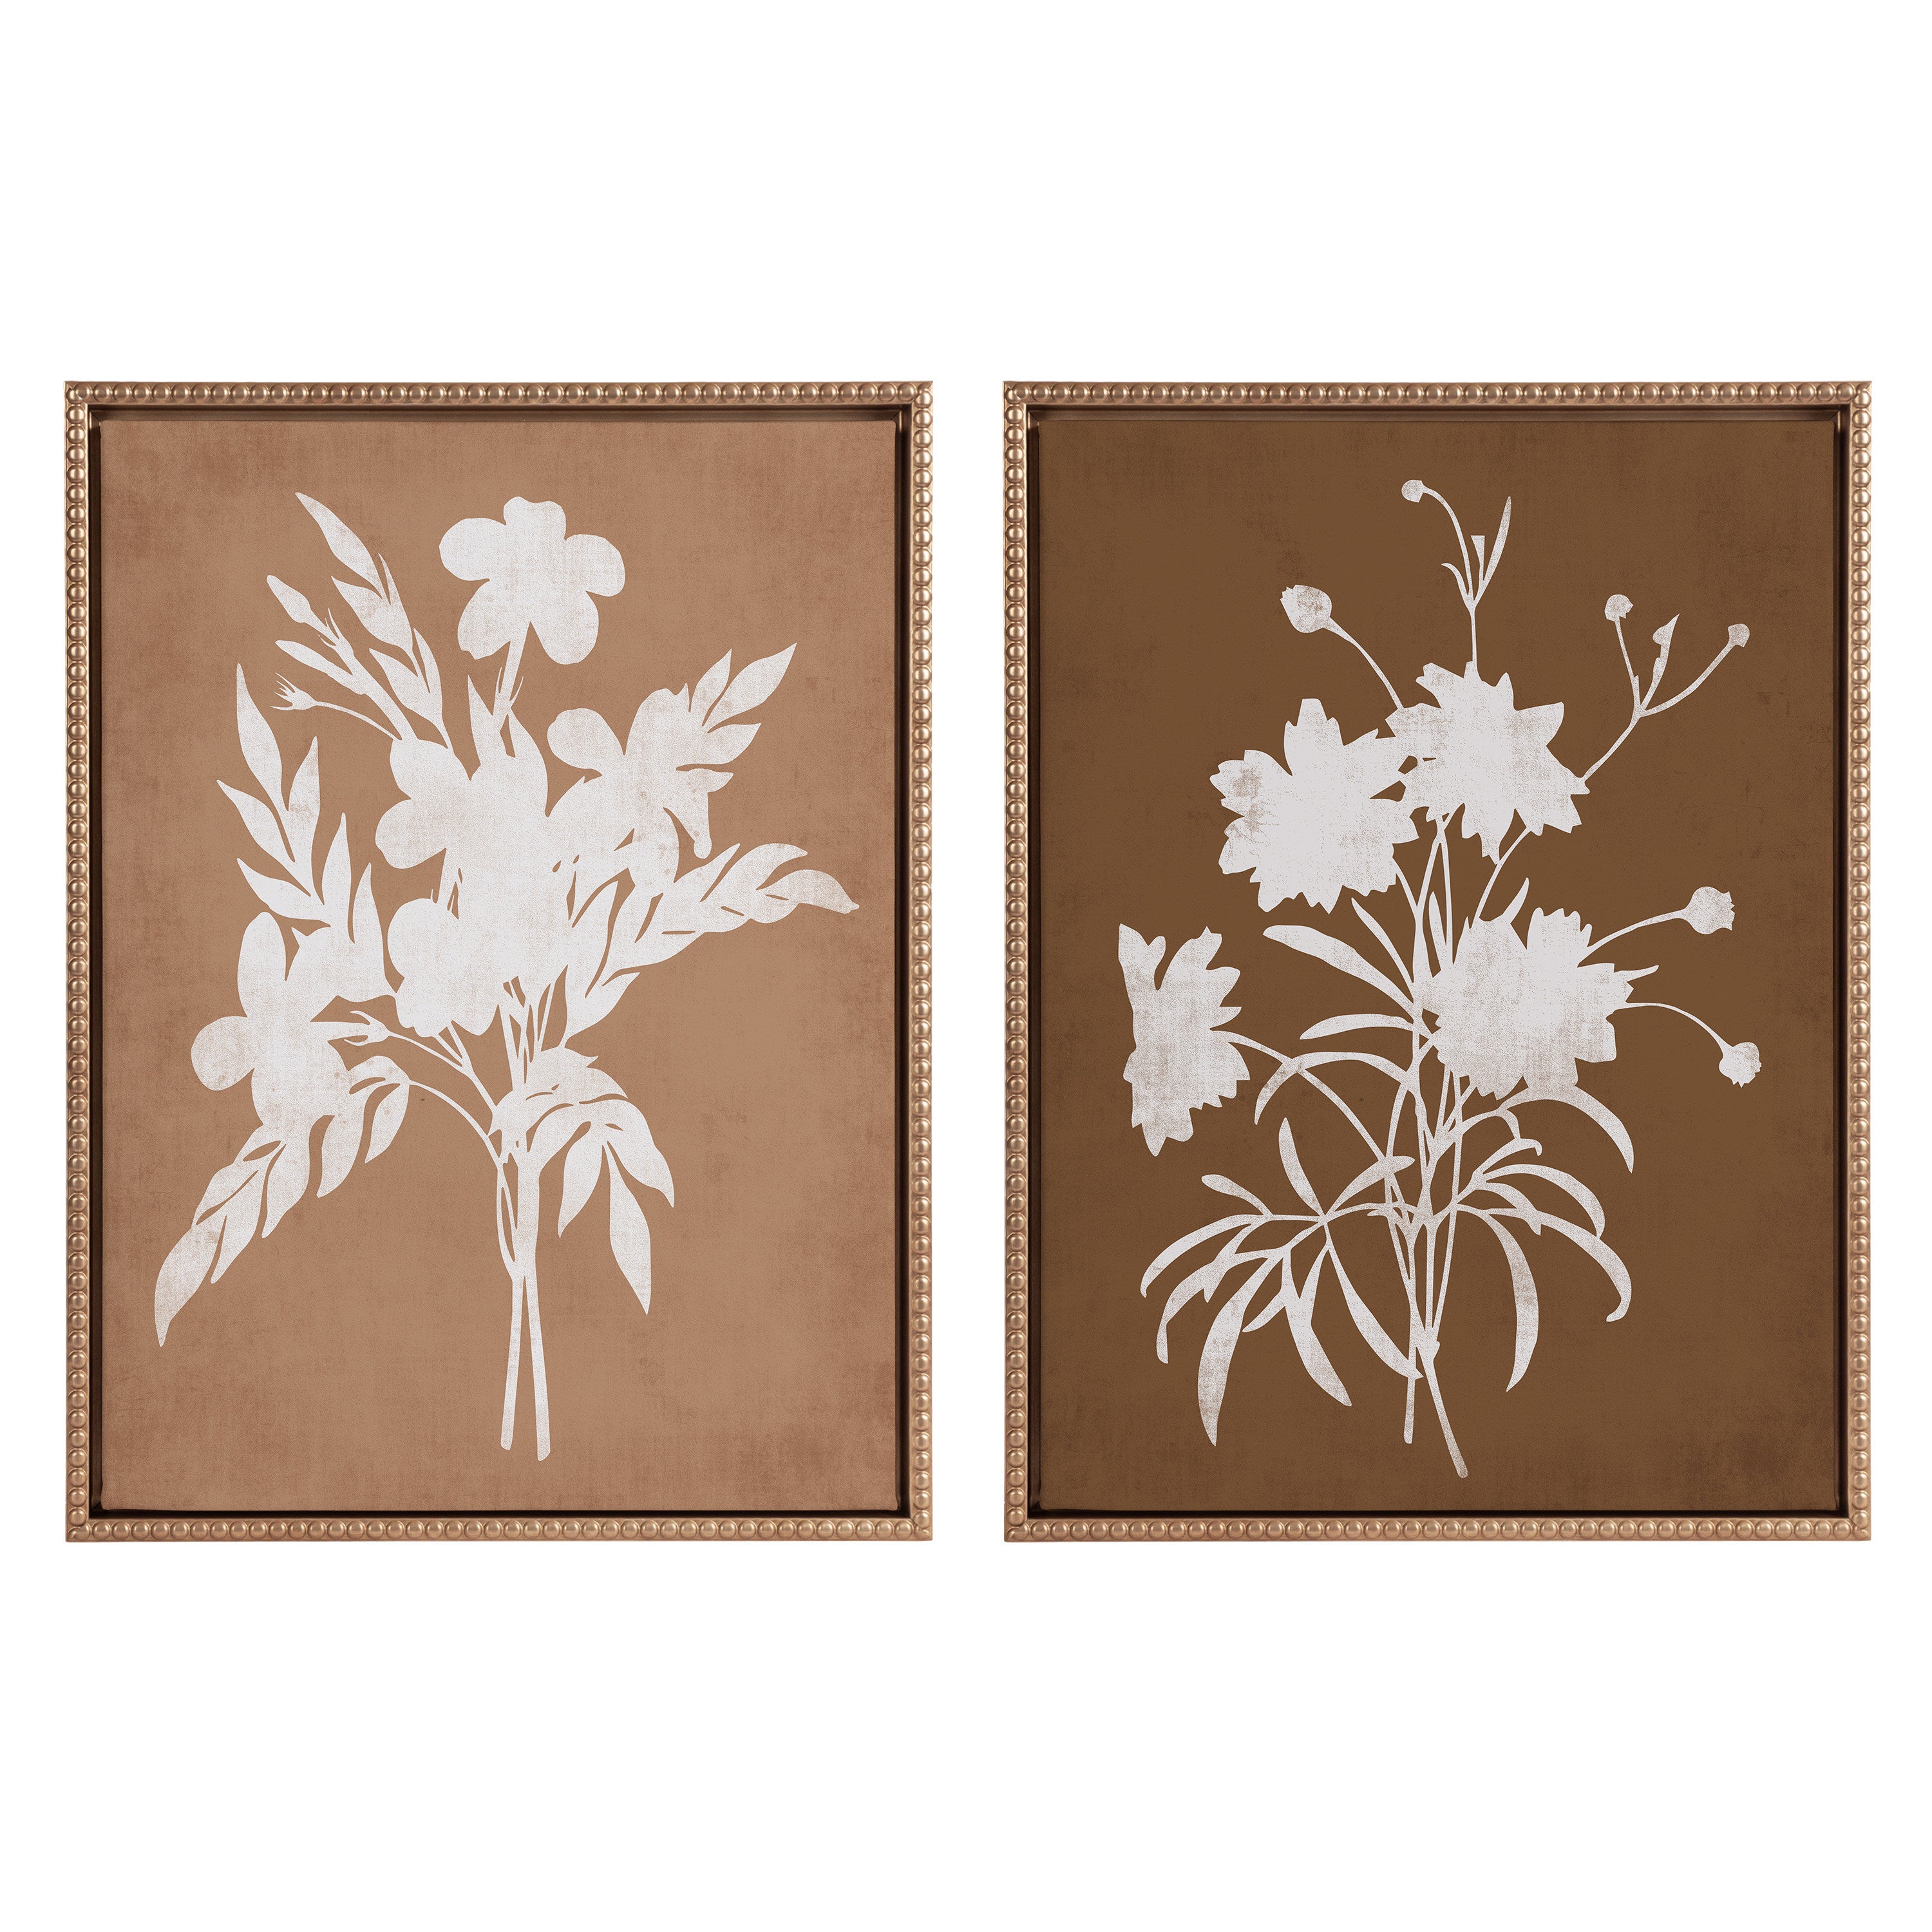 Sylvie Beaded Spring Floral Silhouette 2 Clay White and Spring Floral Silhouette 11 Bark White Framed Canvas Art Set by Heather Dutton